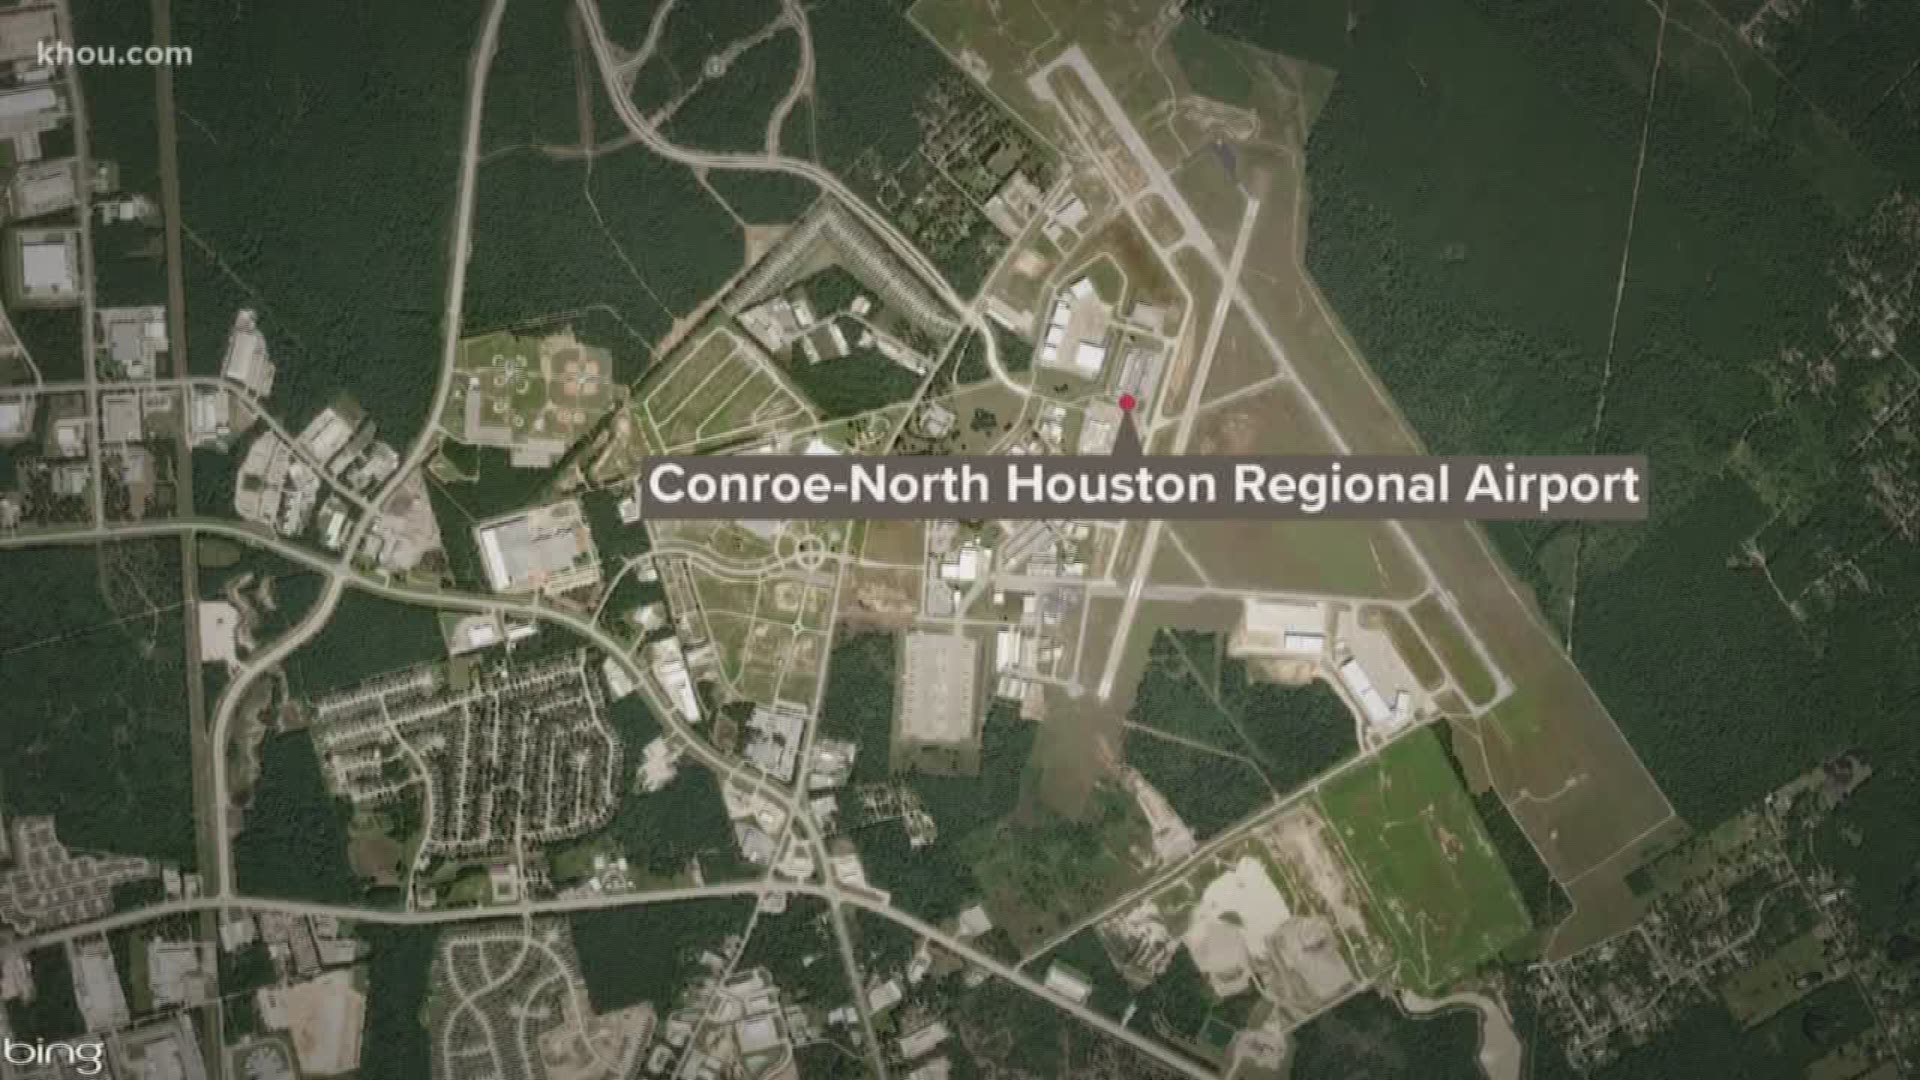 Two people are dead after a small plane crashed Saturday evening in Conroe.